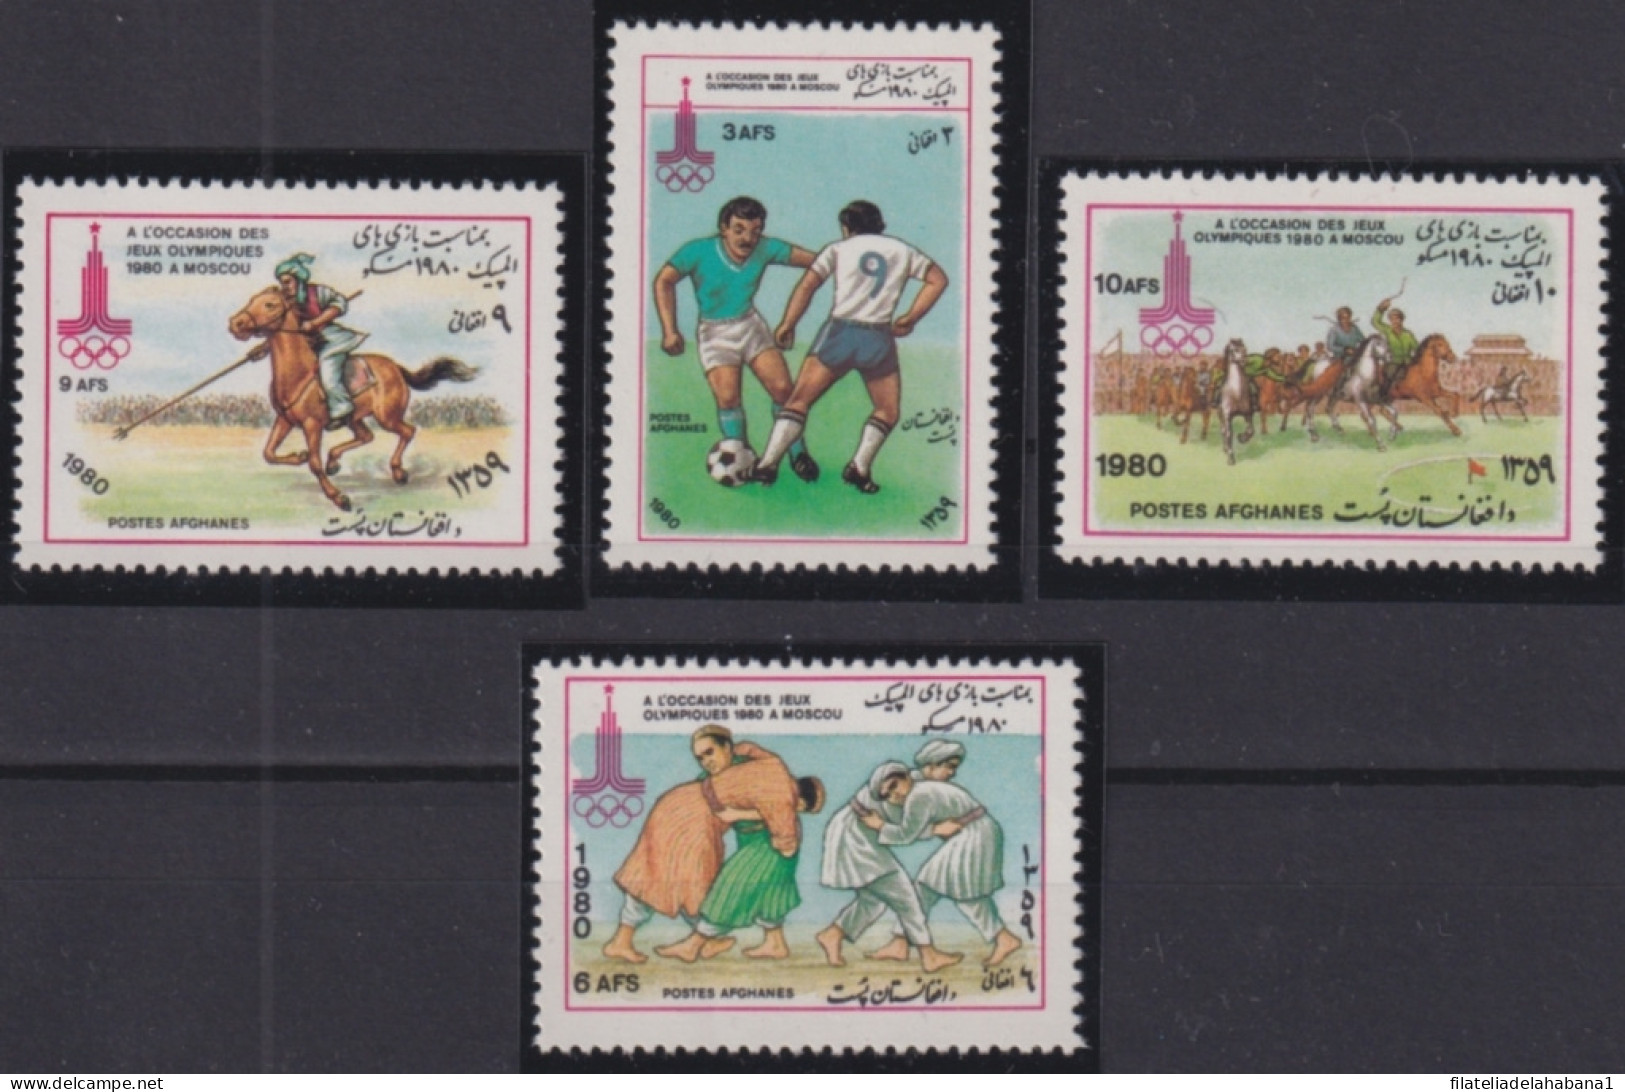 F-EX50248 AFGHANISTAN MNH 1980 OLYMPIC GAMES MOSCOW TRADITIONAL SPORT EQUESTRIAN.  - Sommer 1980: Moskau